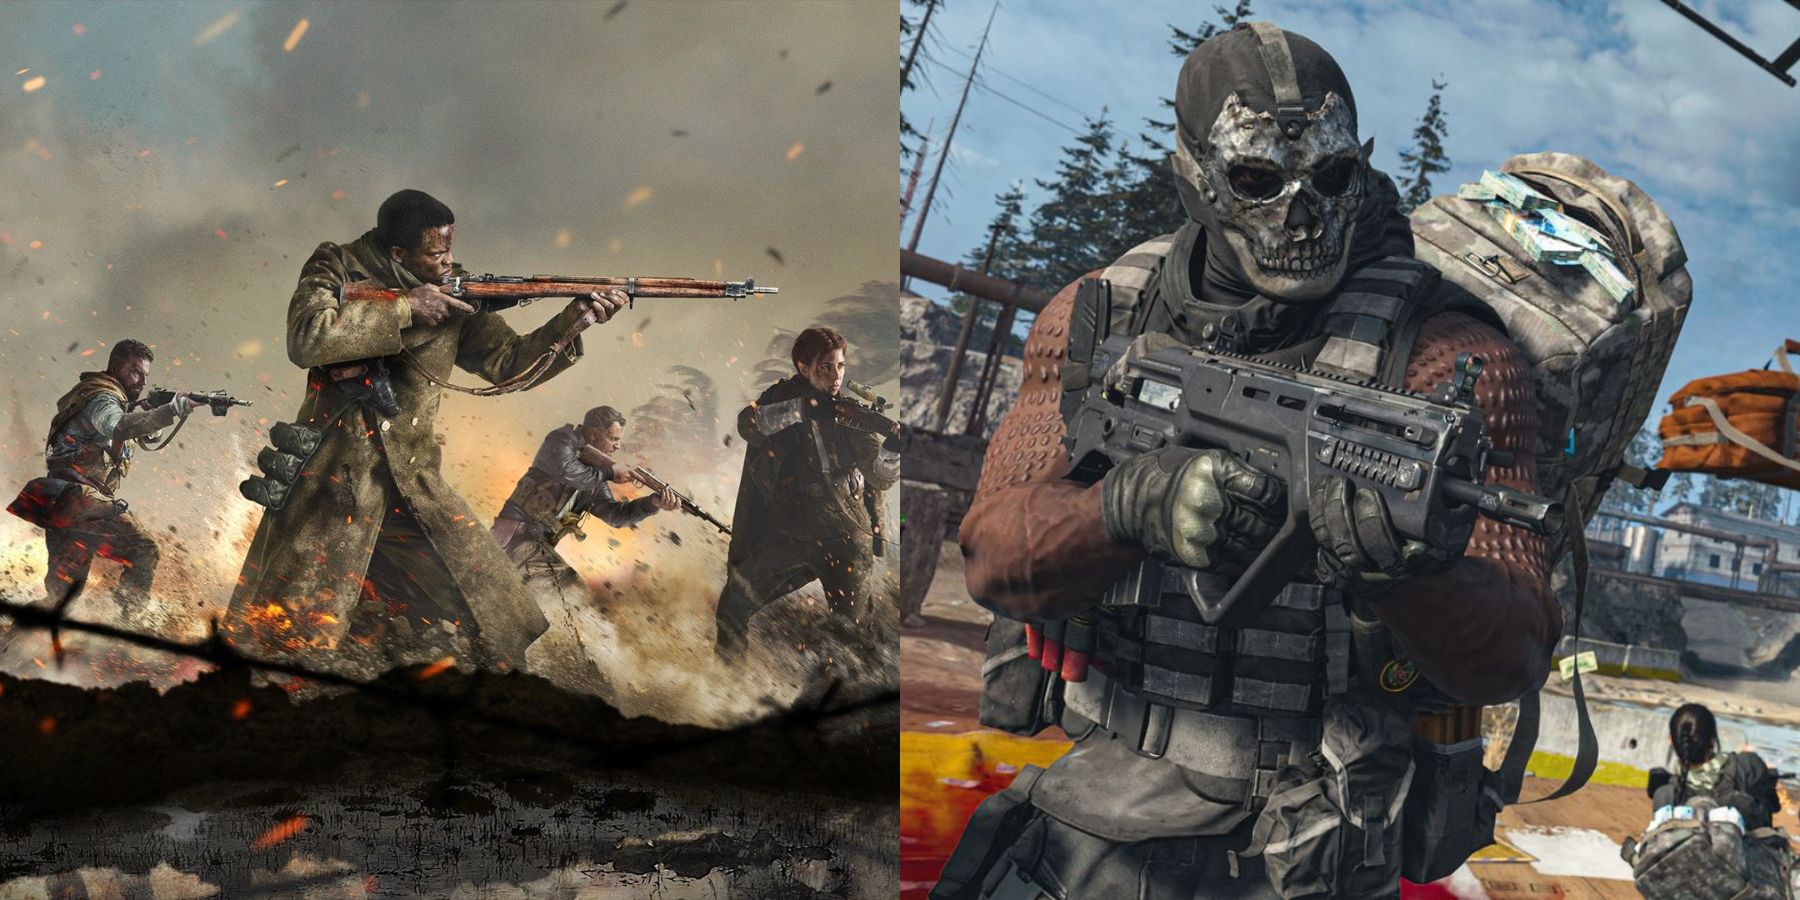 Call of Duty Dev Calls out Activision Over Its Vanguard and Warzone Apology